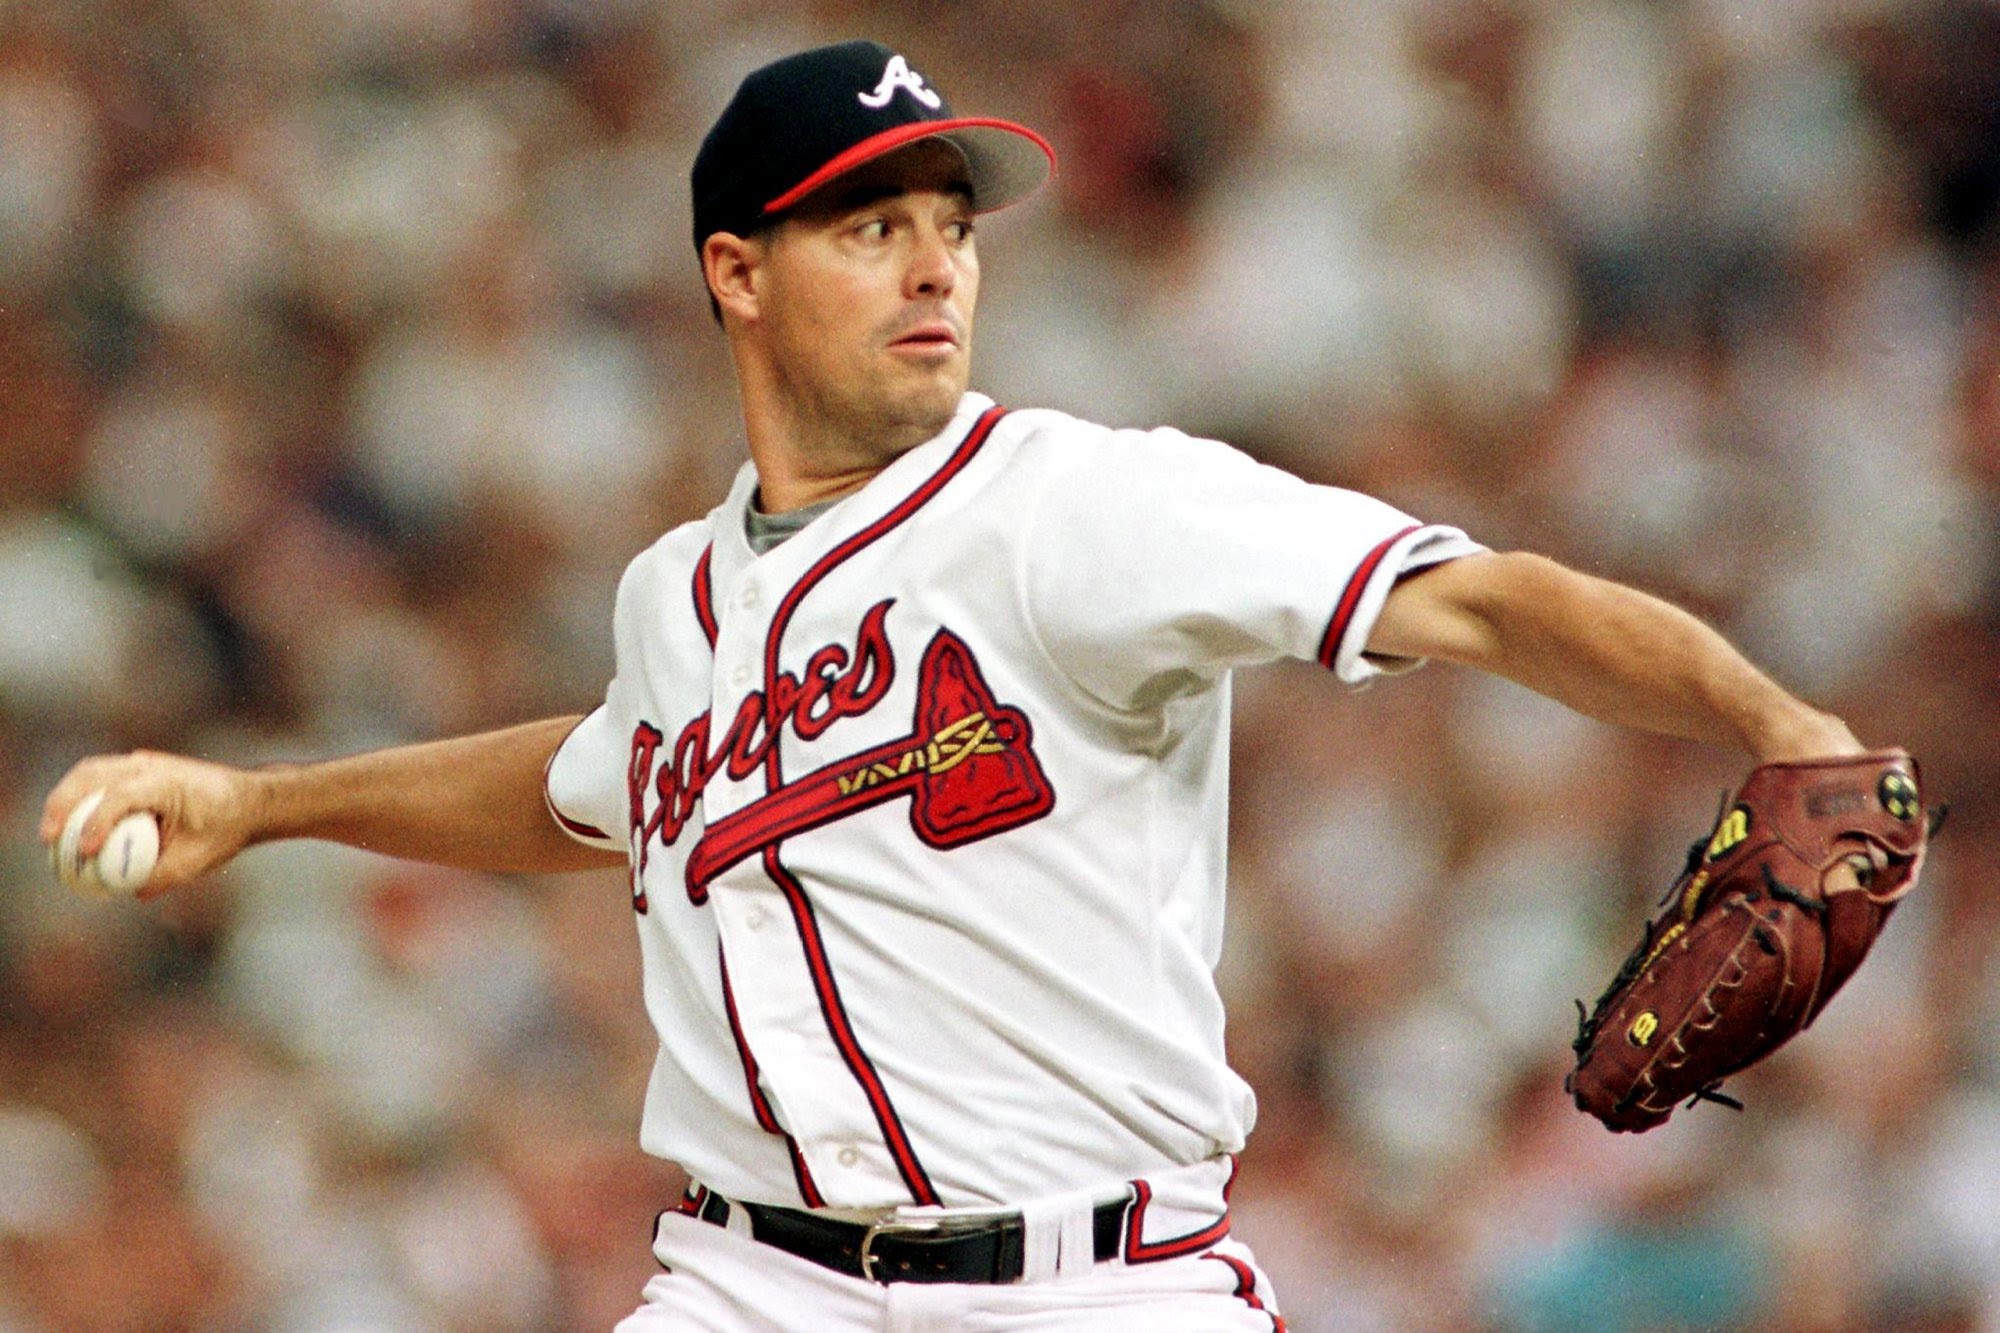 How much is Greg Maddux?